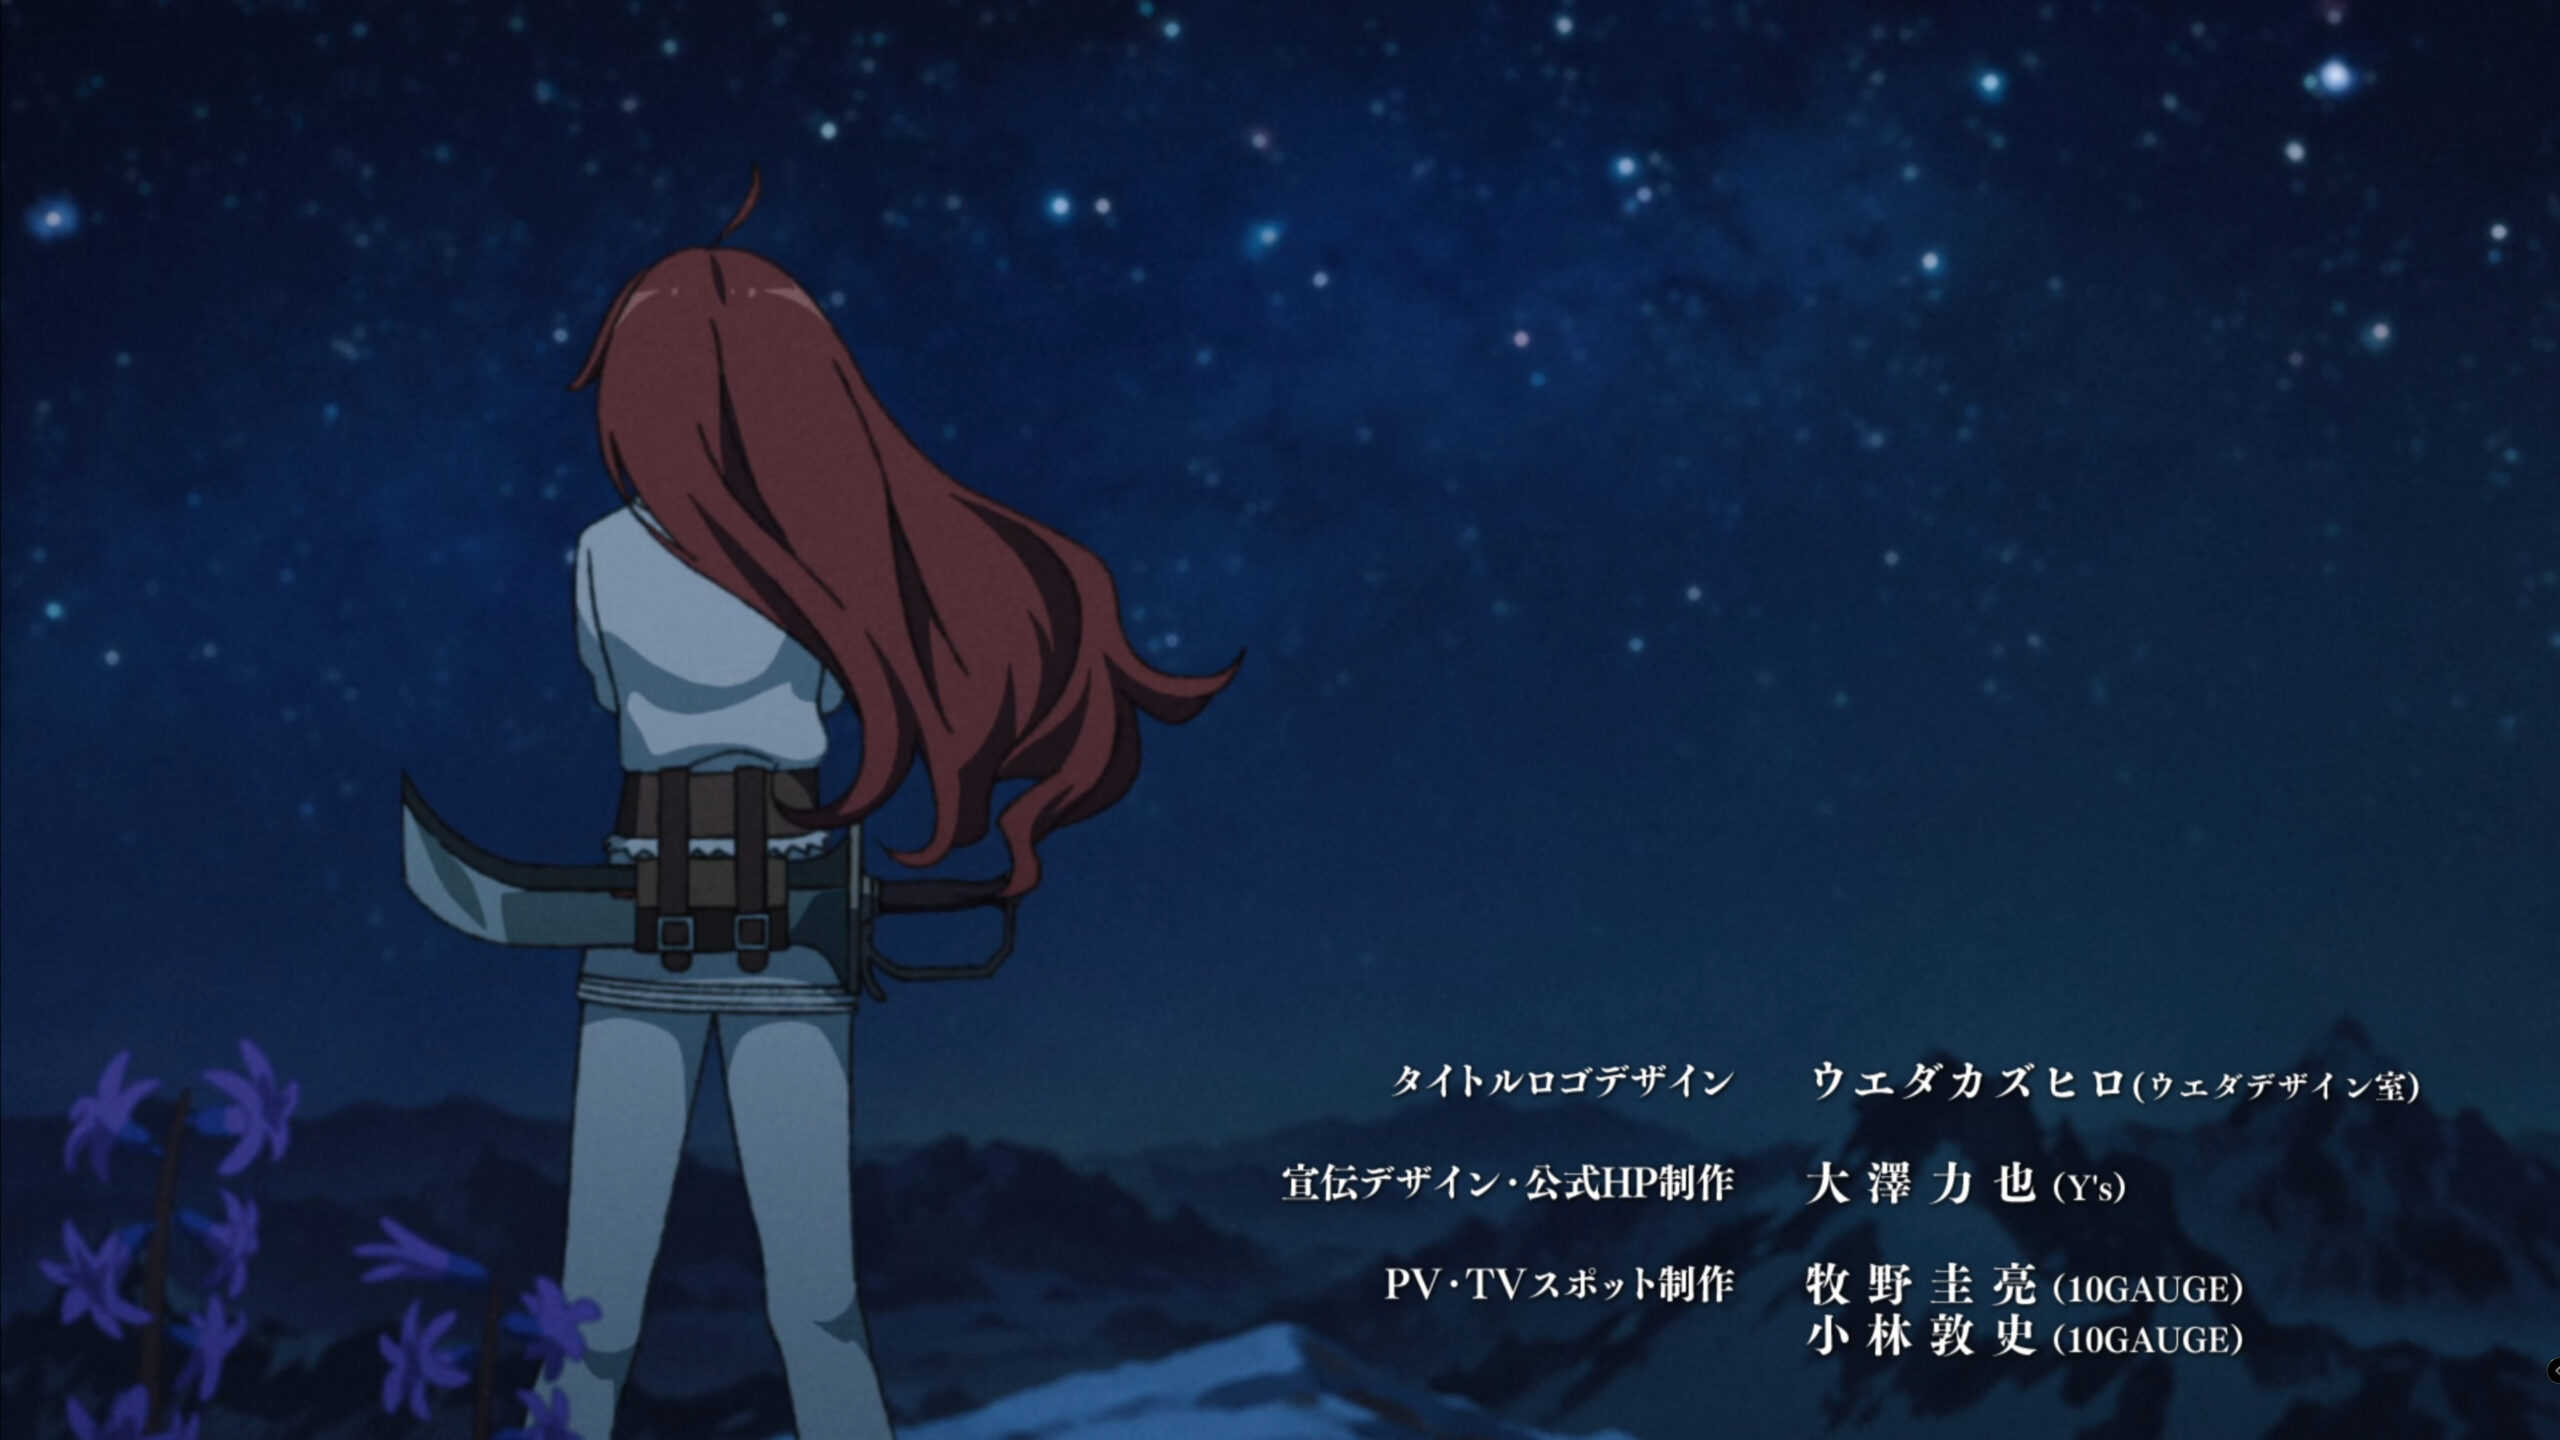 Eris, shown at the end of the episode